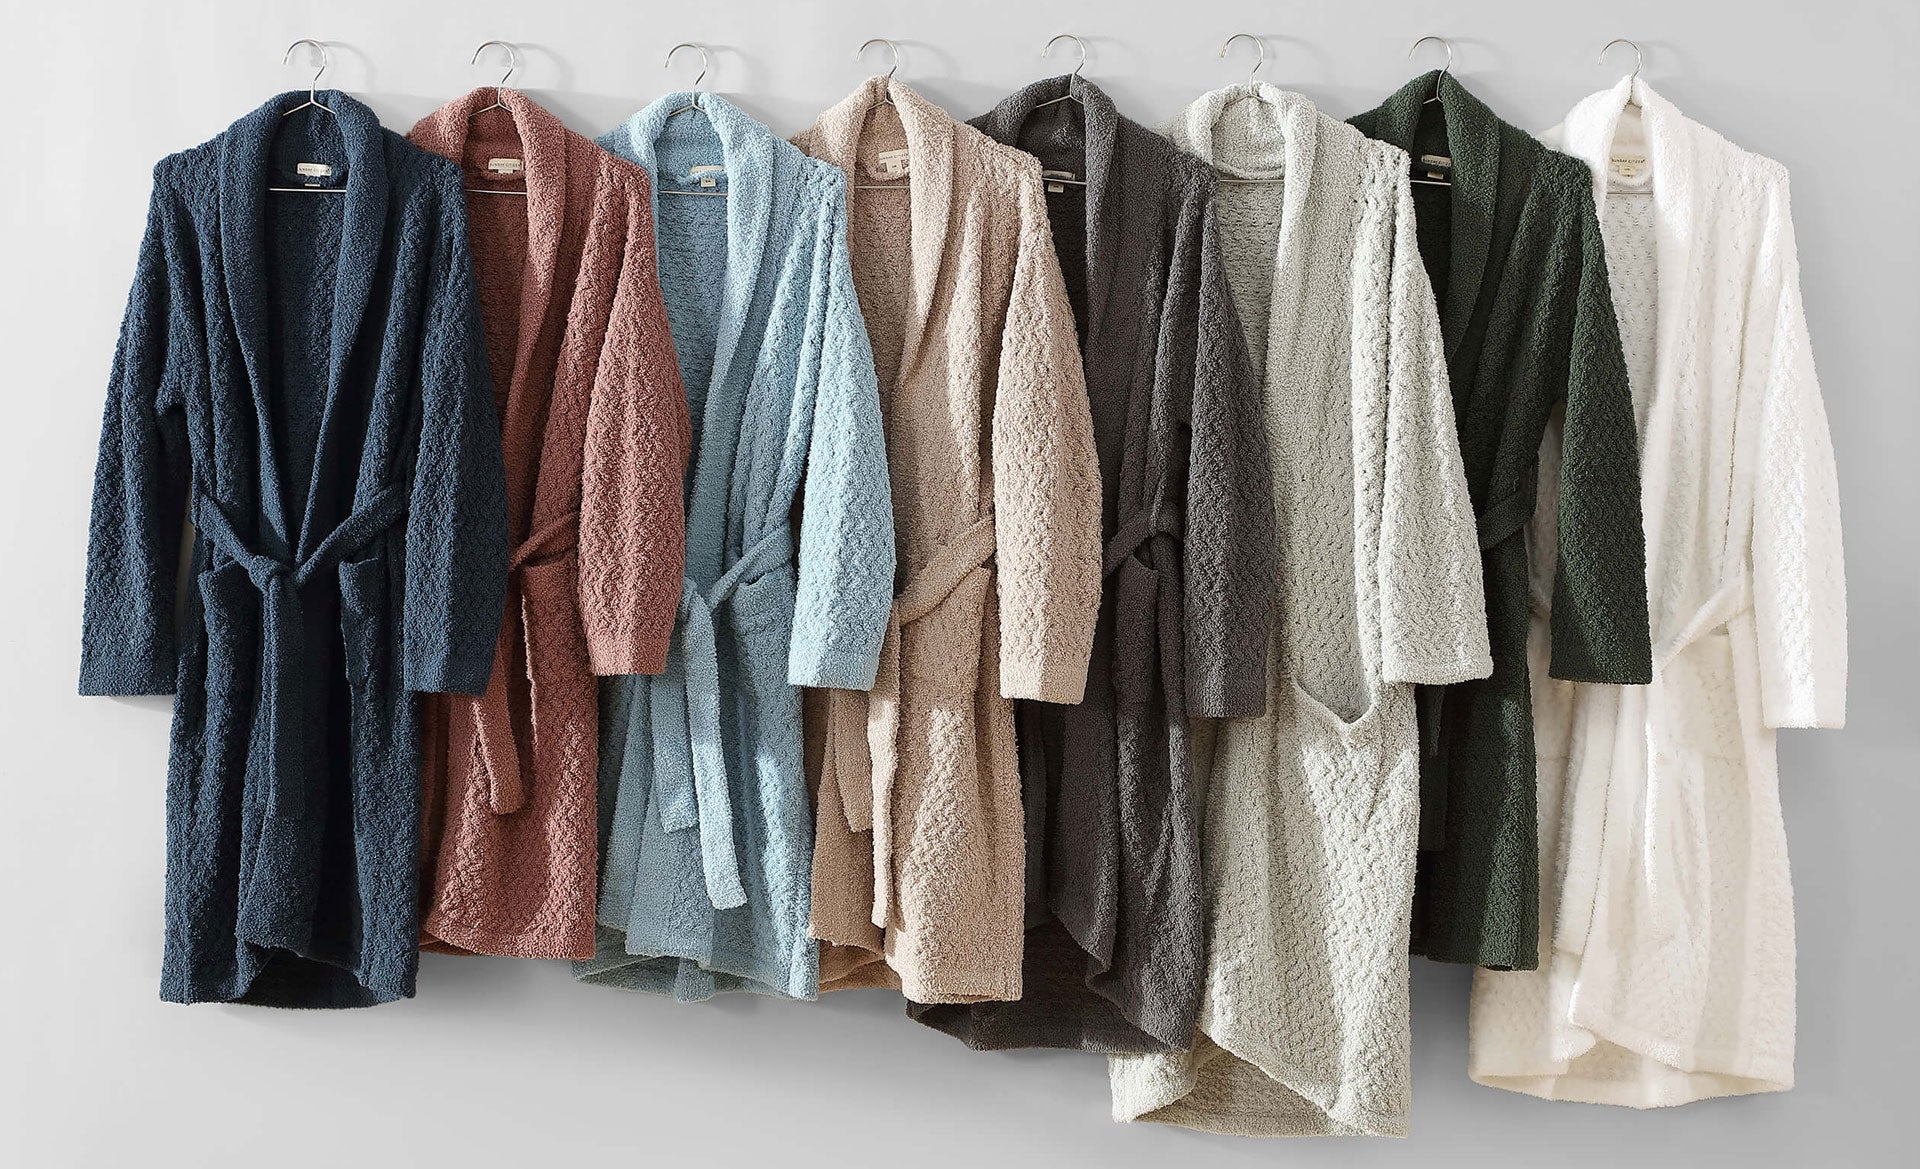 Finding the Perfect Bath Robe: A Buyer's Guide to Materials and Styles